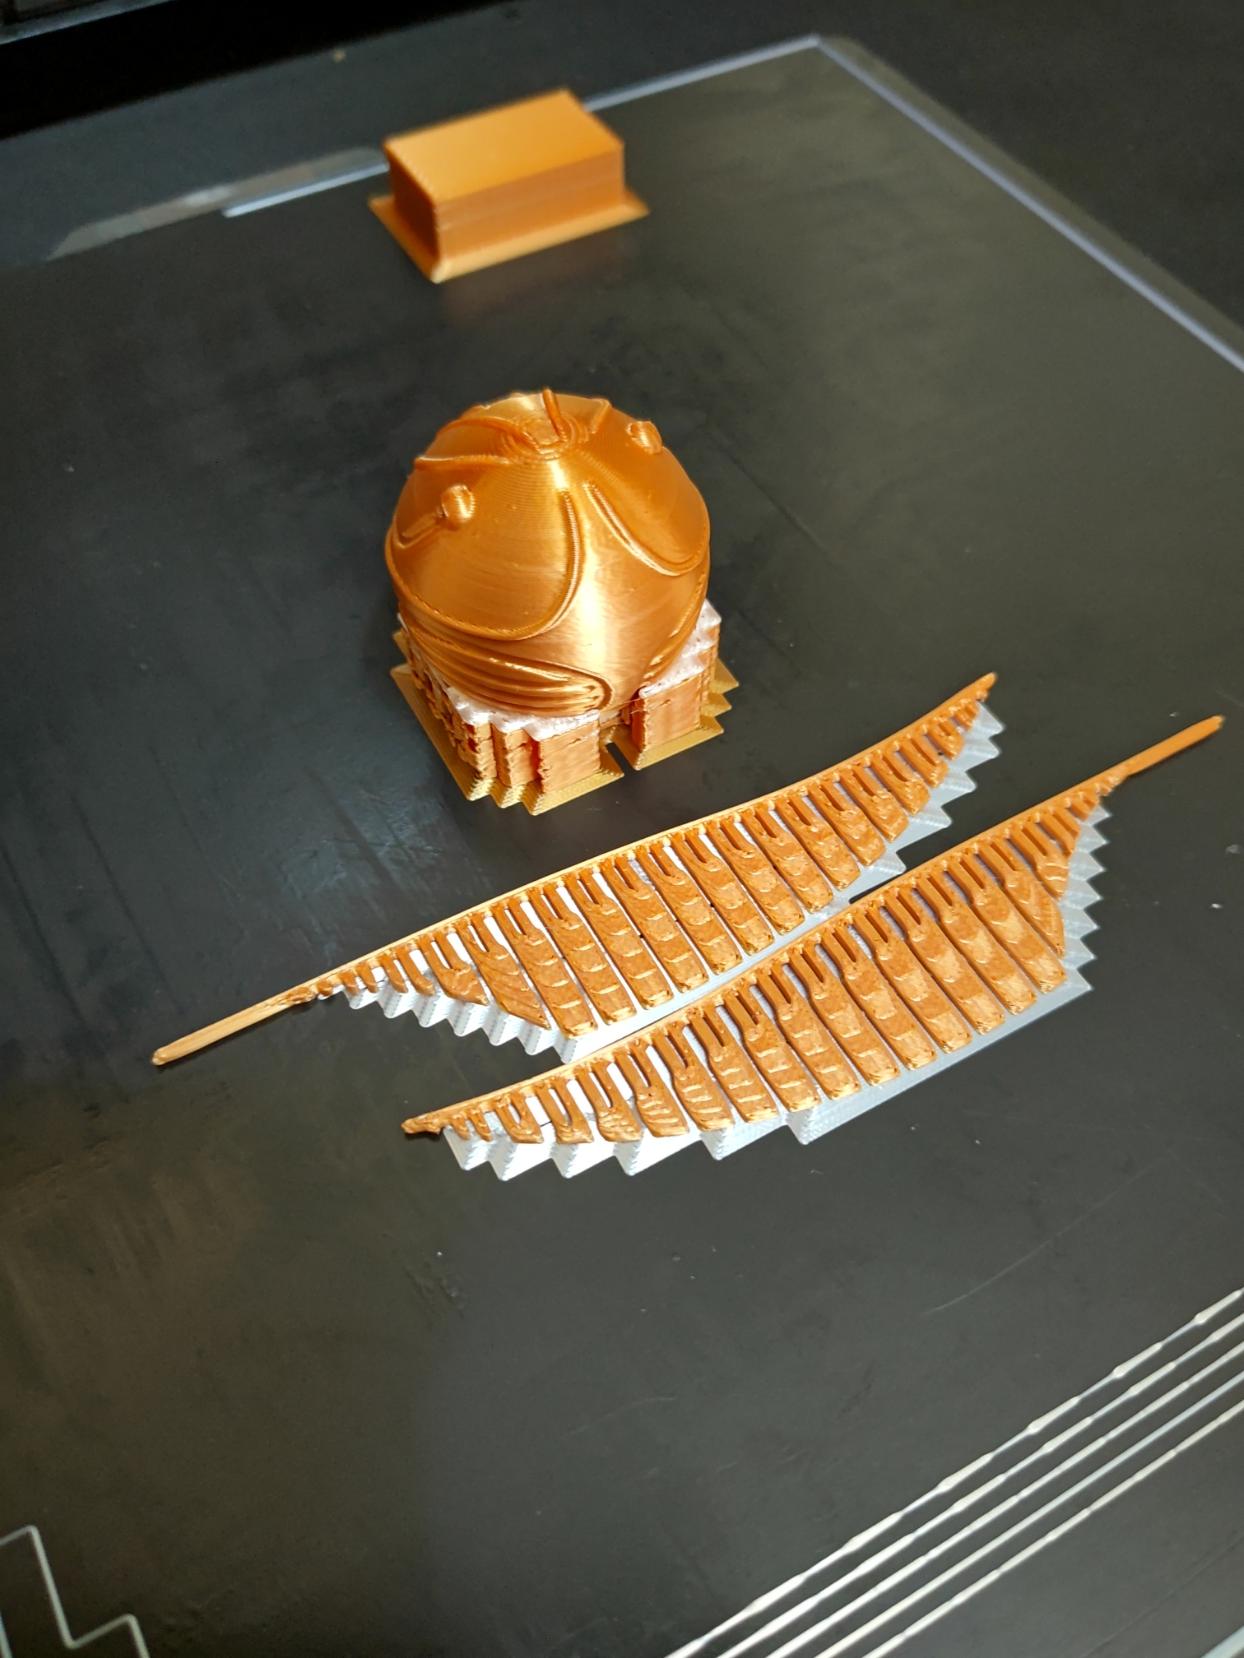 Golden Snitch - Happy Potter - Thanks for the model, loved the electroplating video!  Had to make my own, used the bambu lab interface material as the support which worked really well and allowed me to print the wings flat.  Painted it later in gold and silver :-) - 3d model